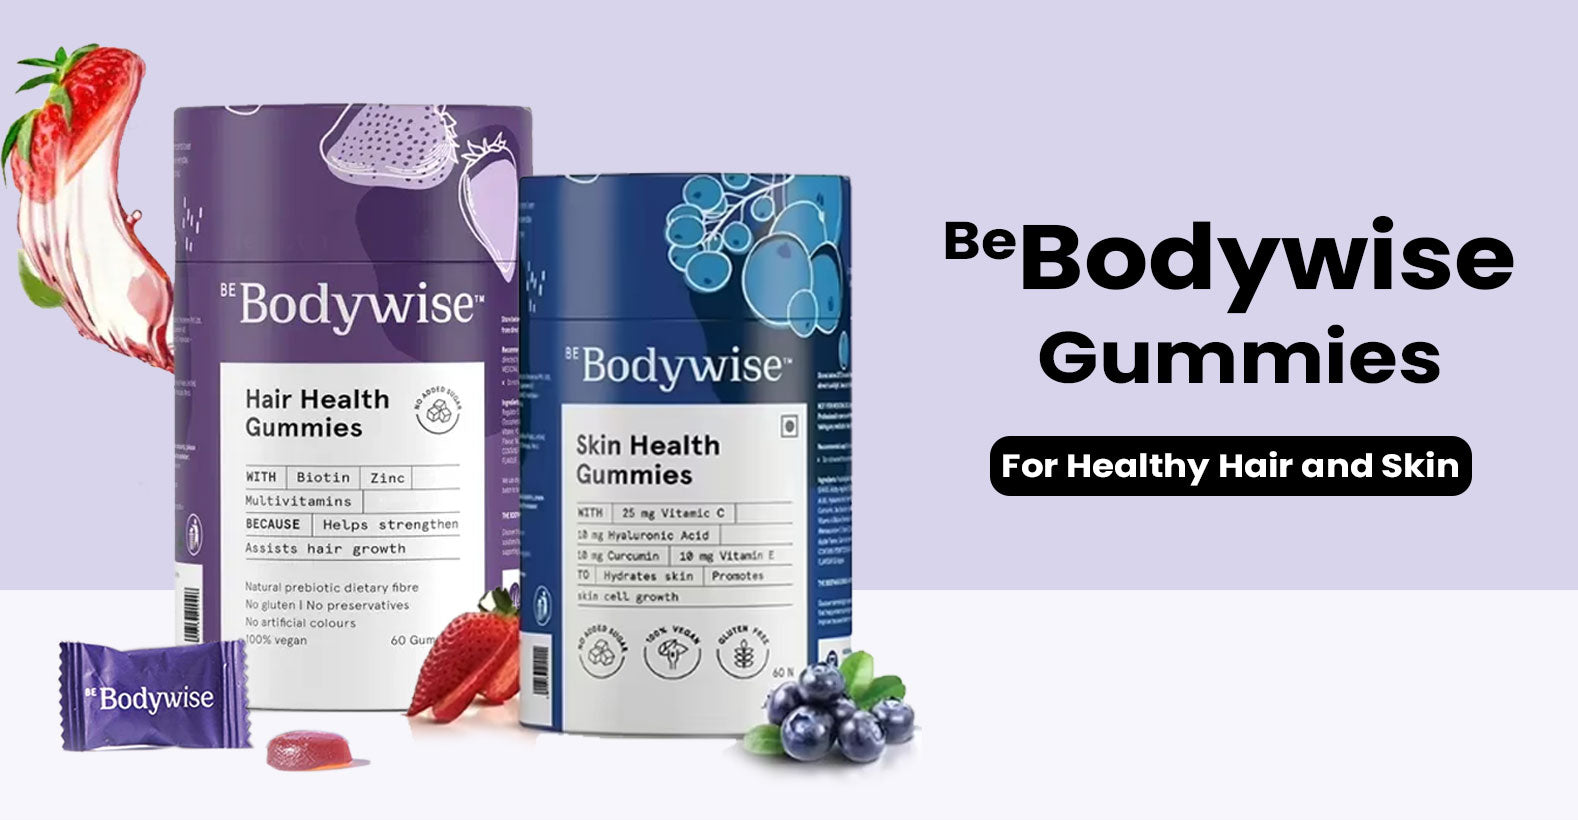 Be Bodywise Gummies For Hair and Skin